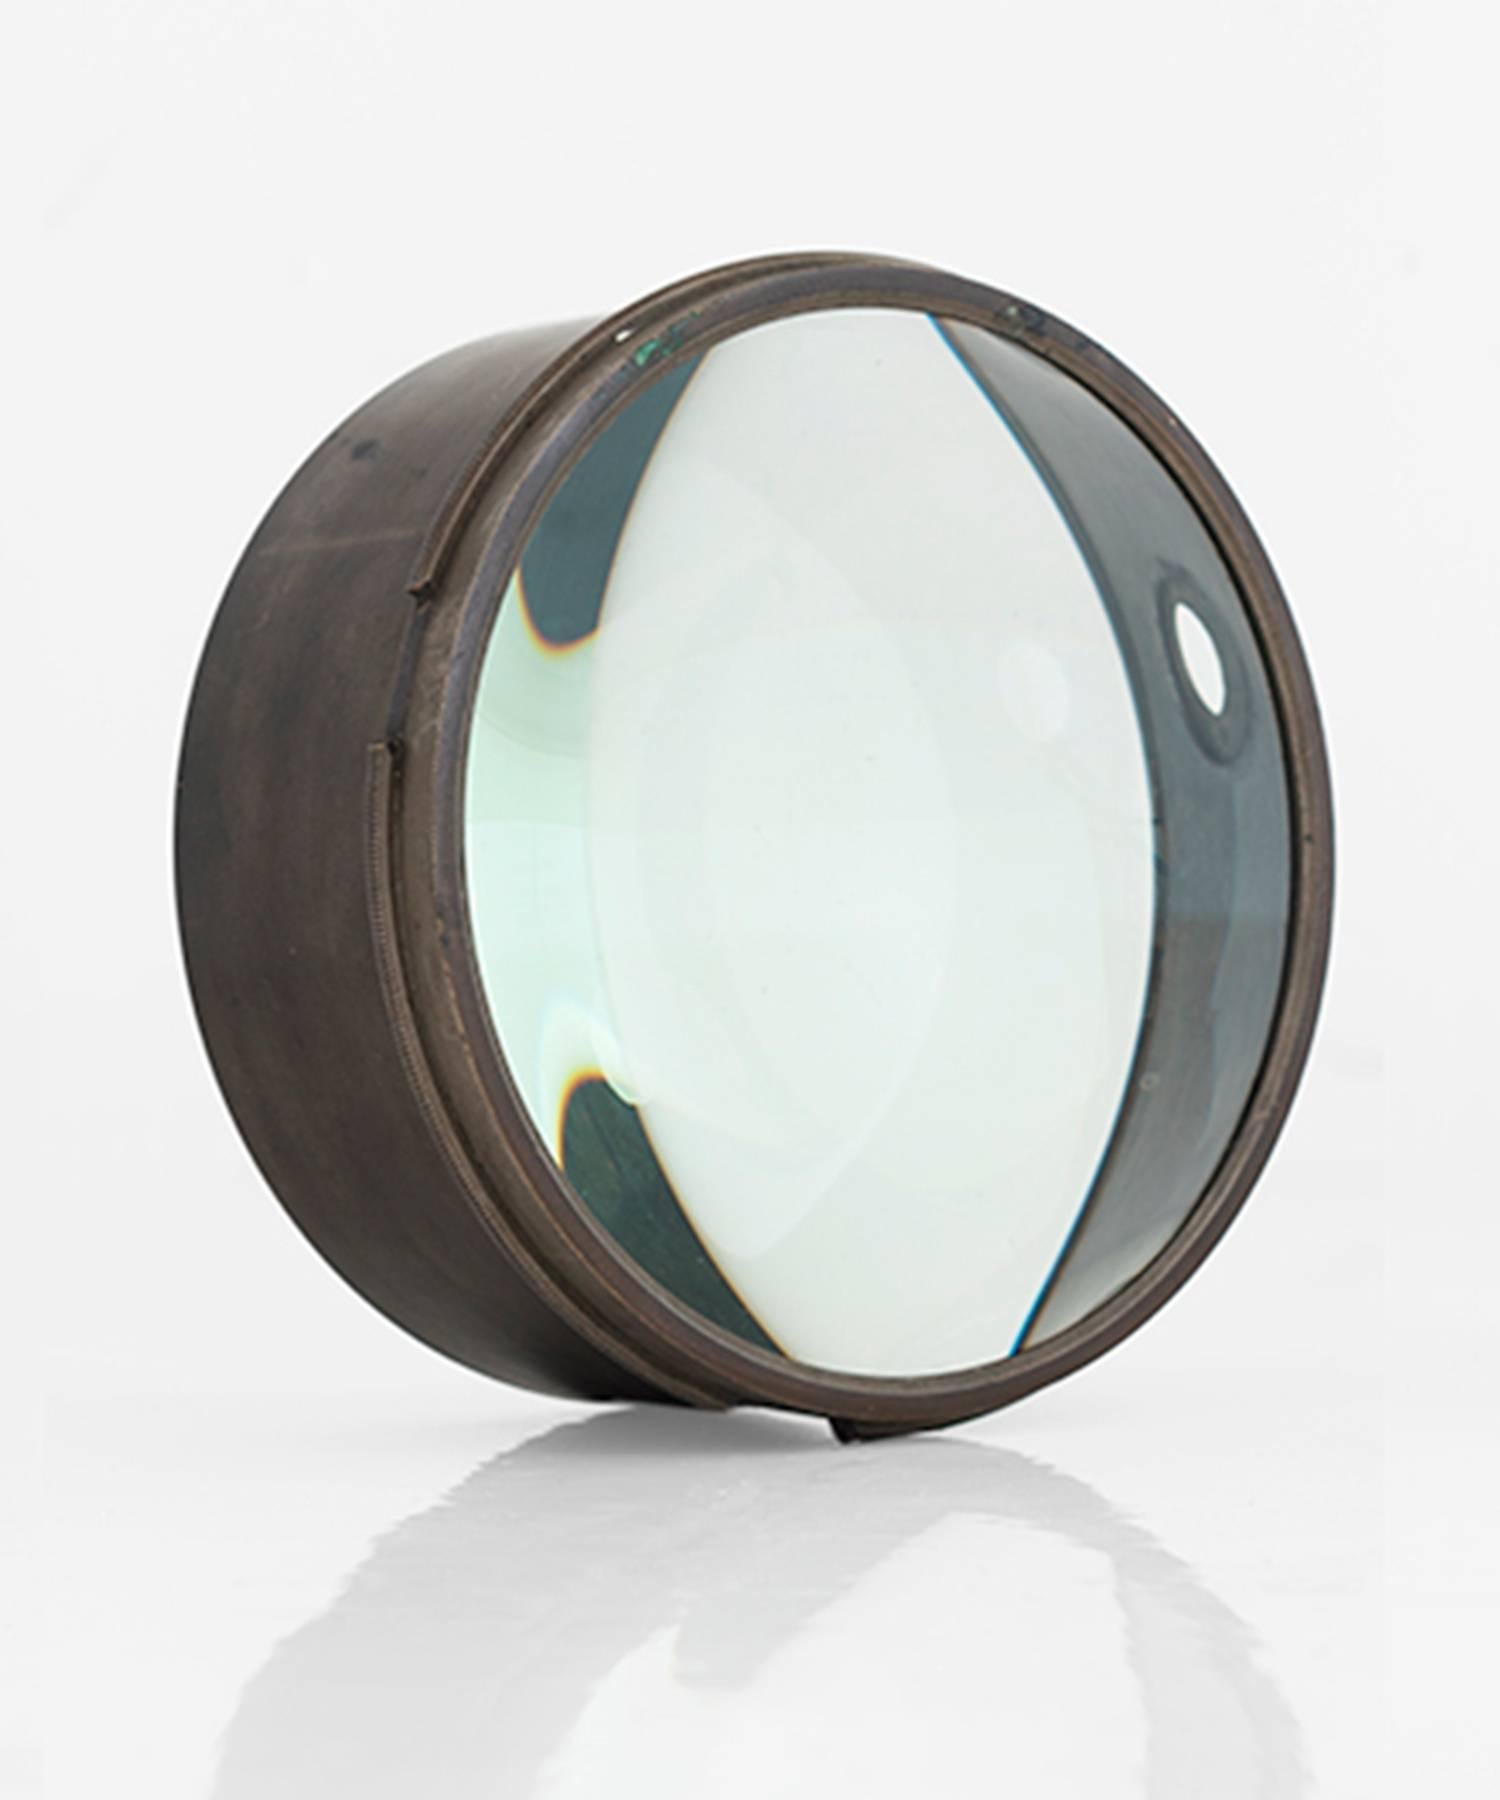 Medium brass magnifying glass lens, circa 1910.

A collection of magnifying glass lenses salvaged from magic Lantern condensers and telescopes. One encased in brass, one encased in painted steel.